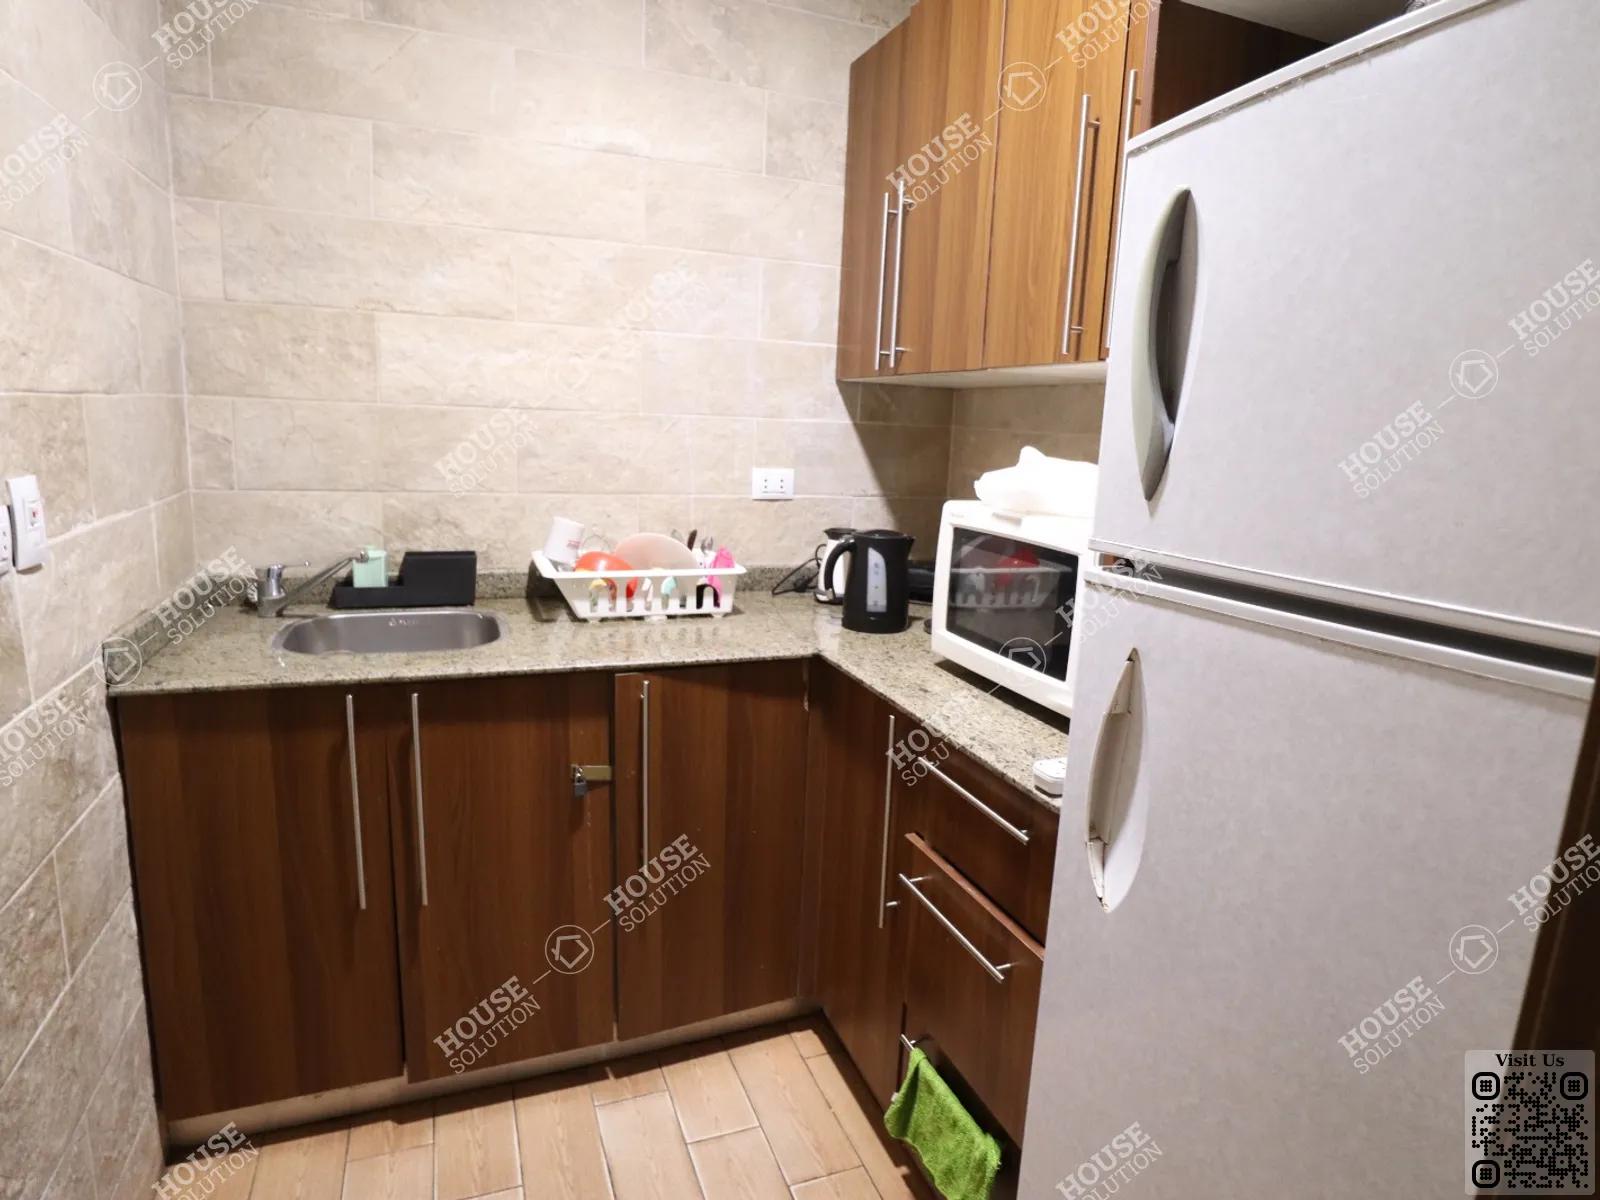 KITCHEN  @ Office spaces For Rent In Maadi Maadi Sarayat Area: 660 m² consists of 6 Bedrooms 6 Bathrooms Semi furnished 5 stars #4268-2